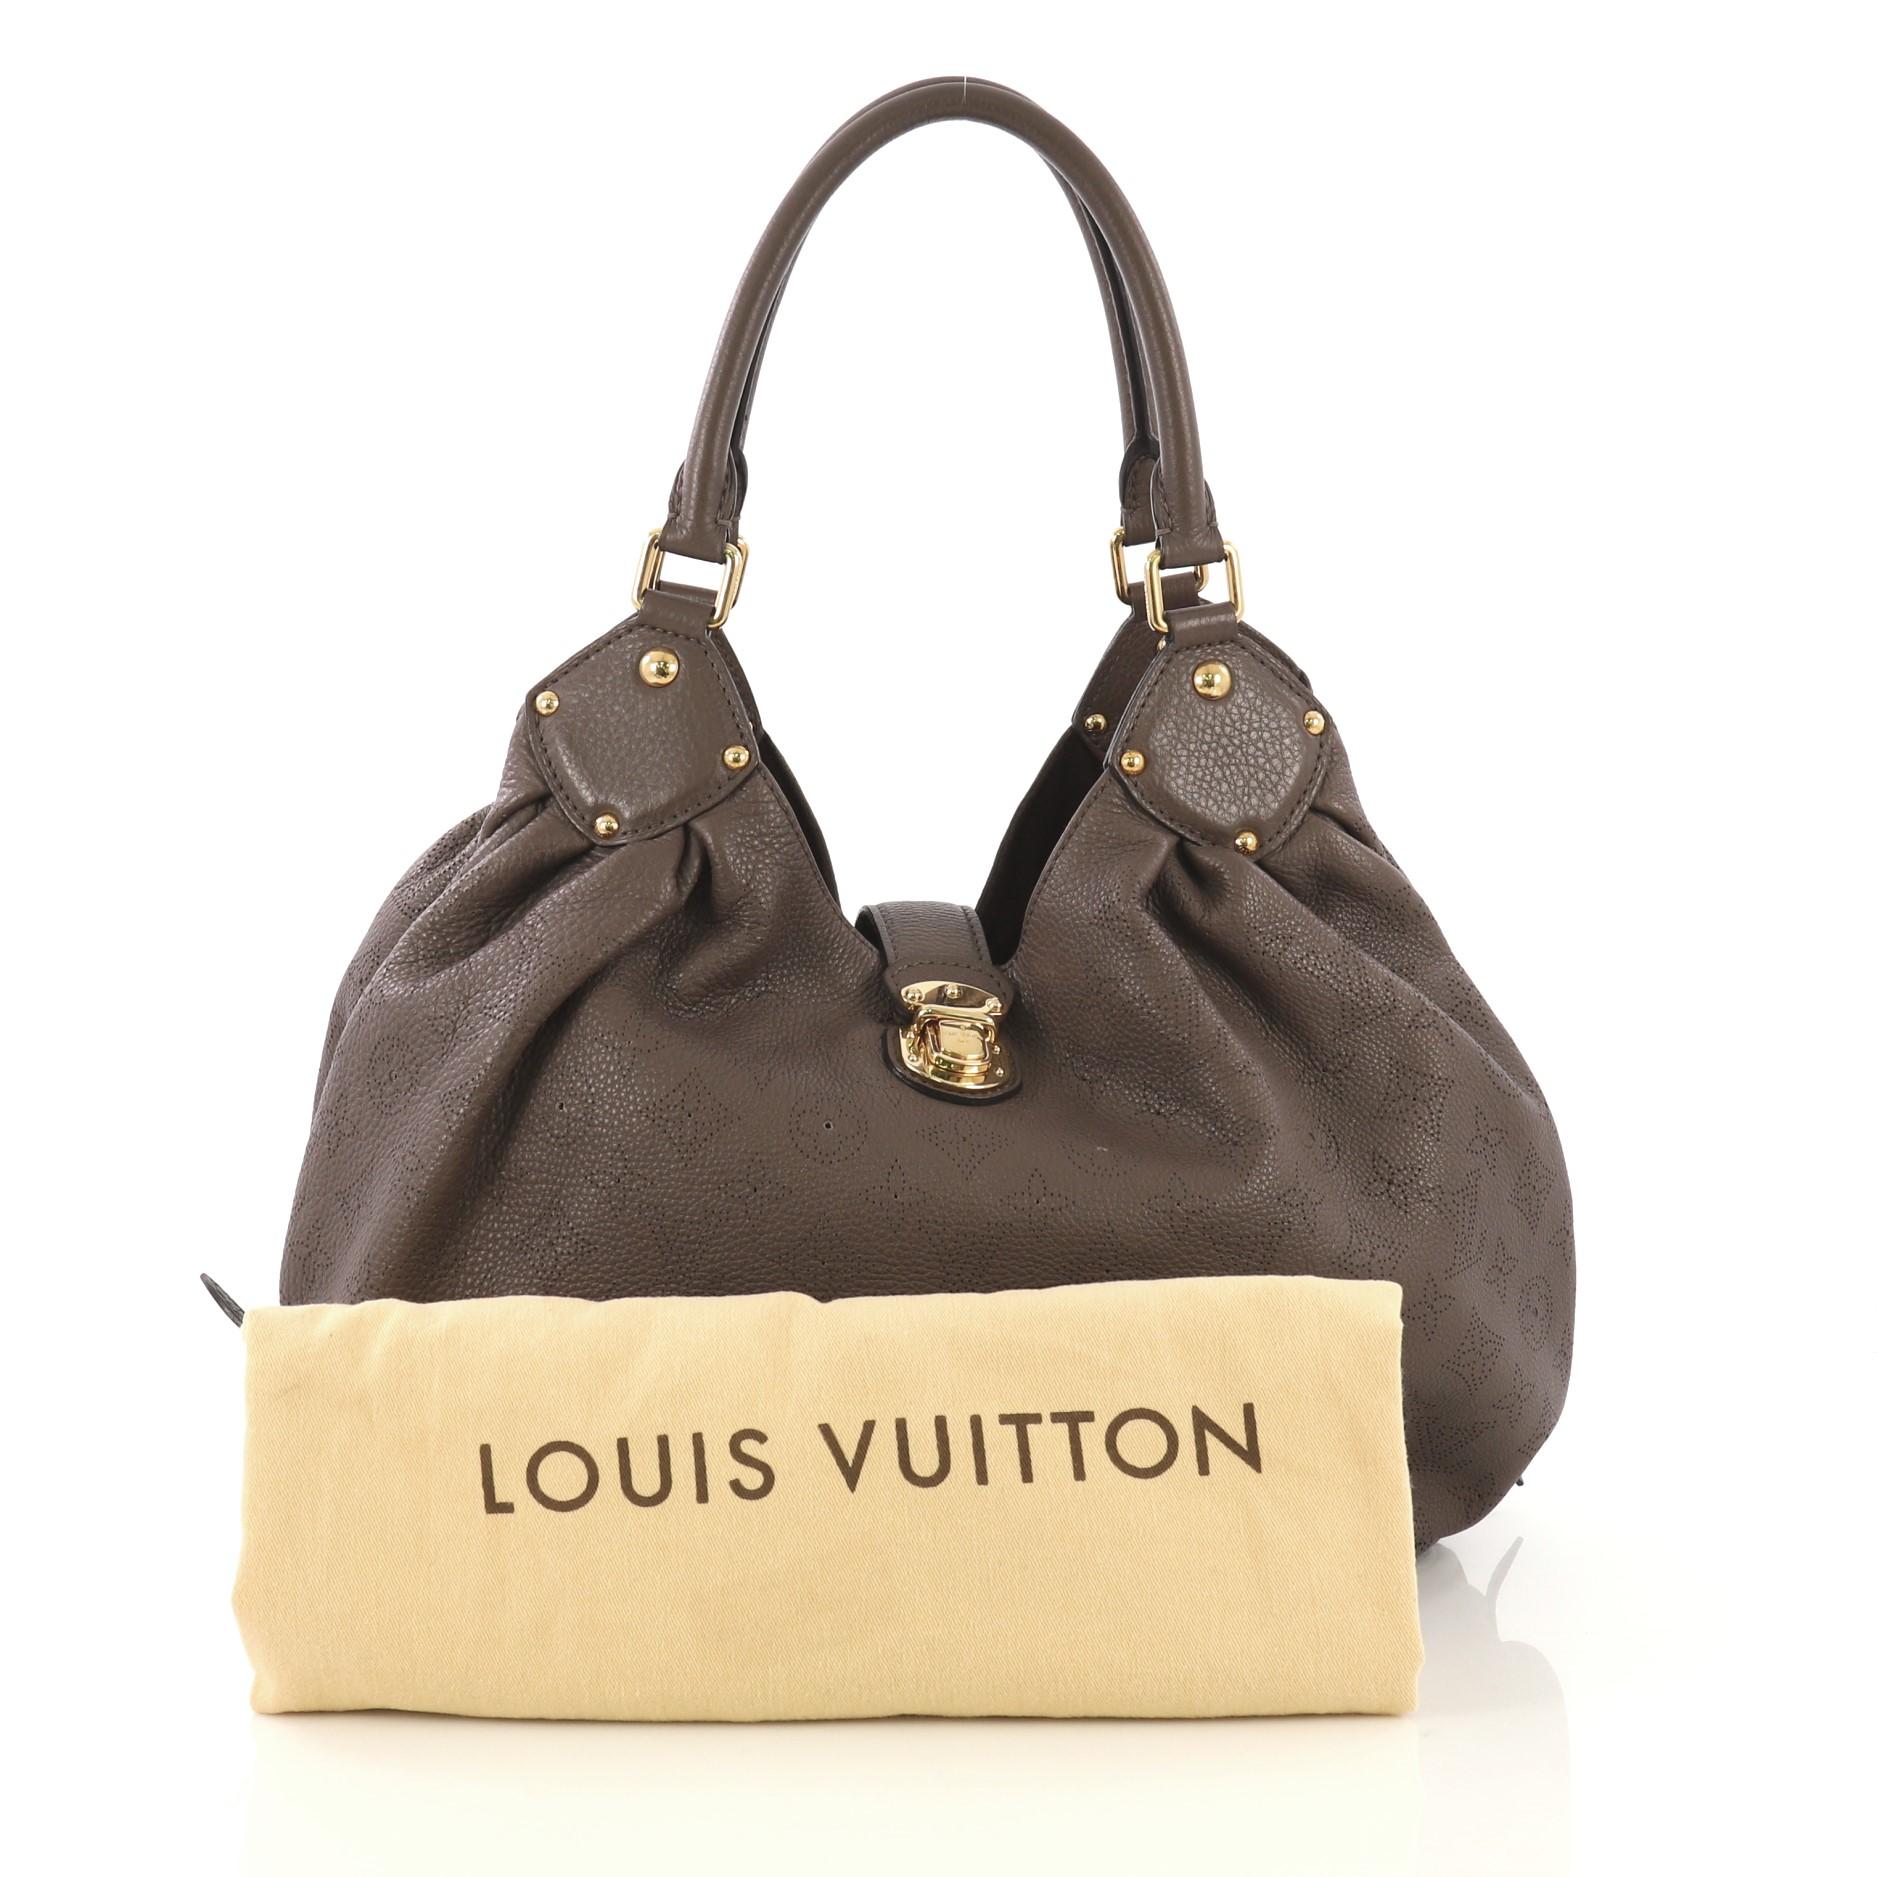 This Louis Vuitton L Hobo Mahina Leather, crafted from brown monogram mahina leather, features dual rolled handles, buckle and stud details, and gold-tone hardware. Its engraved top flap push-lock closure opens to a brown microfiber interior with